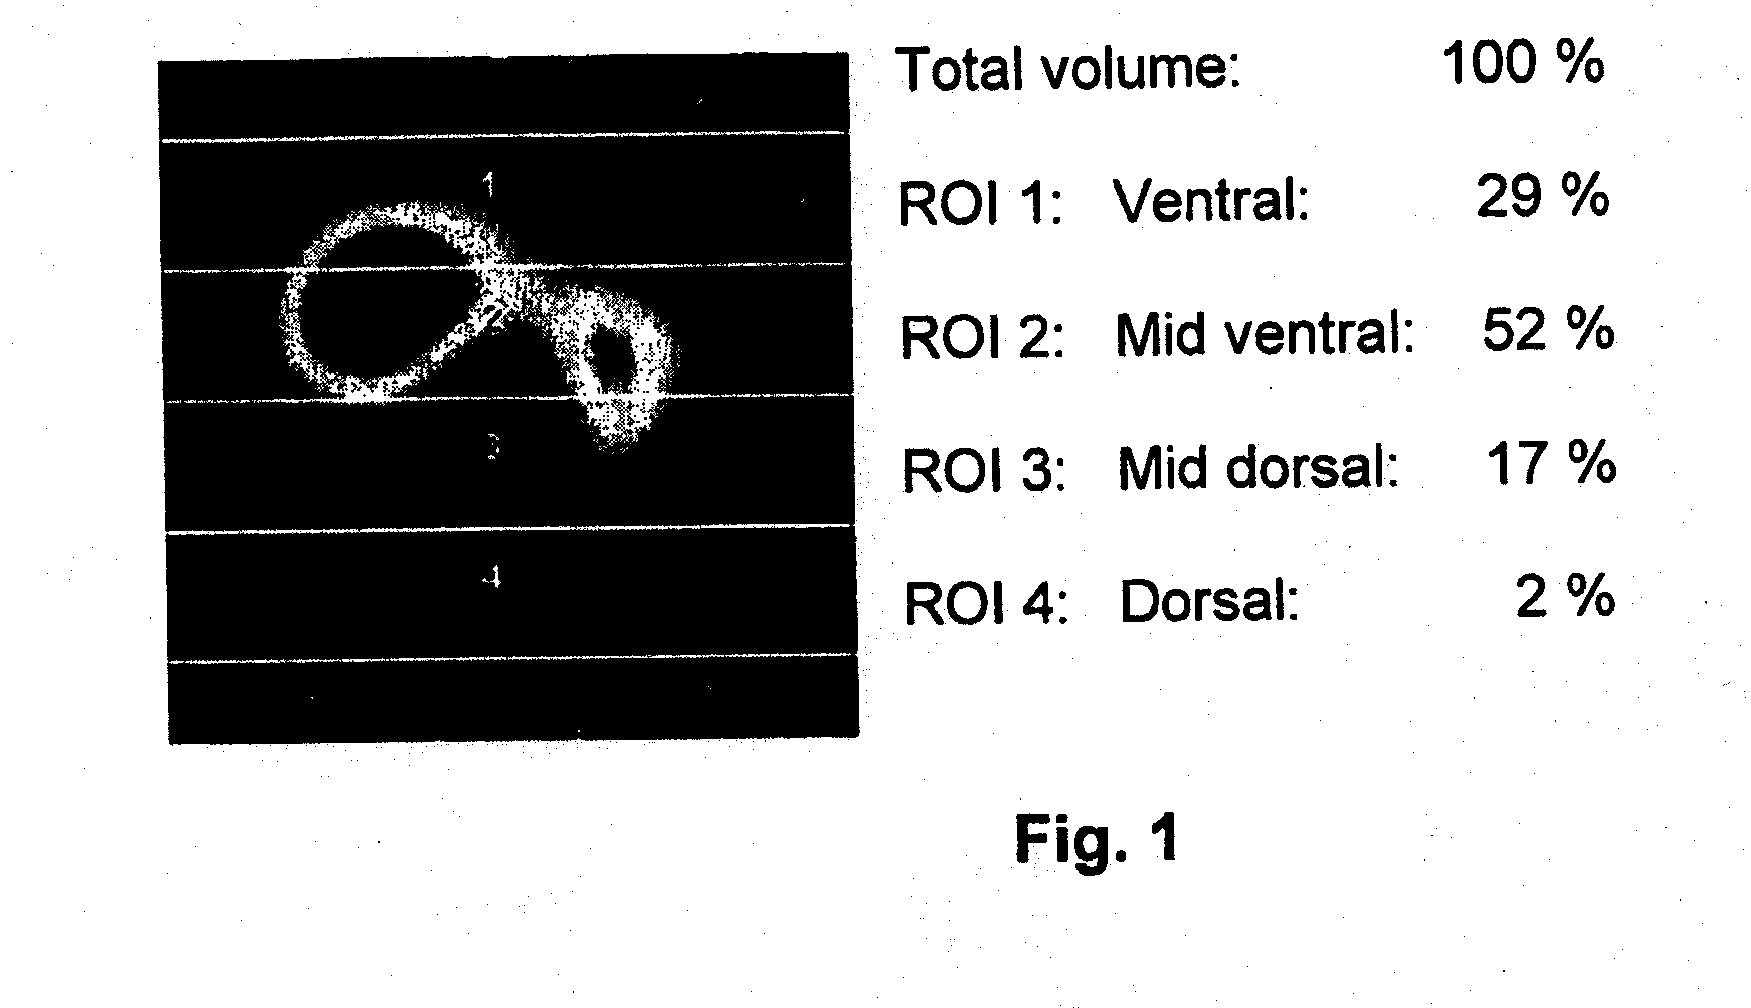 Apparatus and method to determine functional lung characteristics